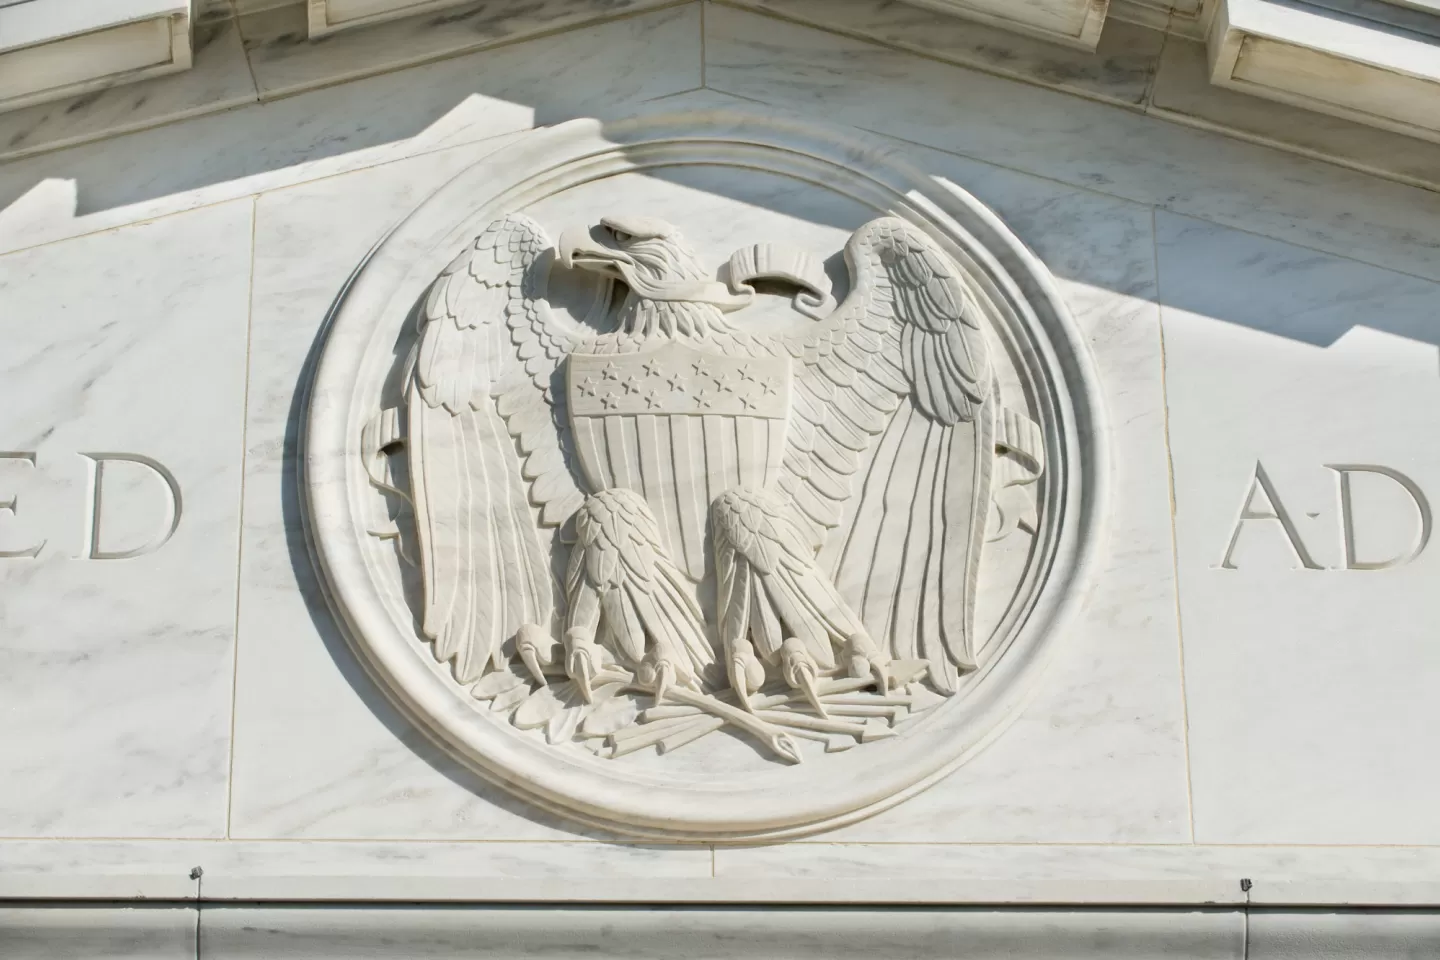 Eagle relief in the west pediment of the Dirksen Senate Office Building.